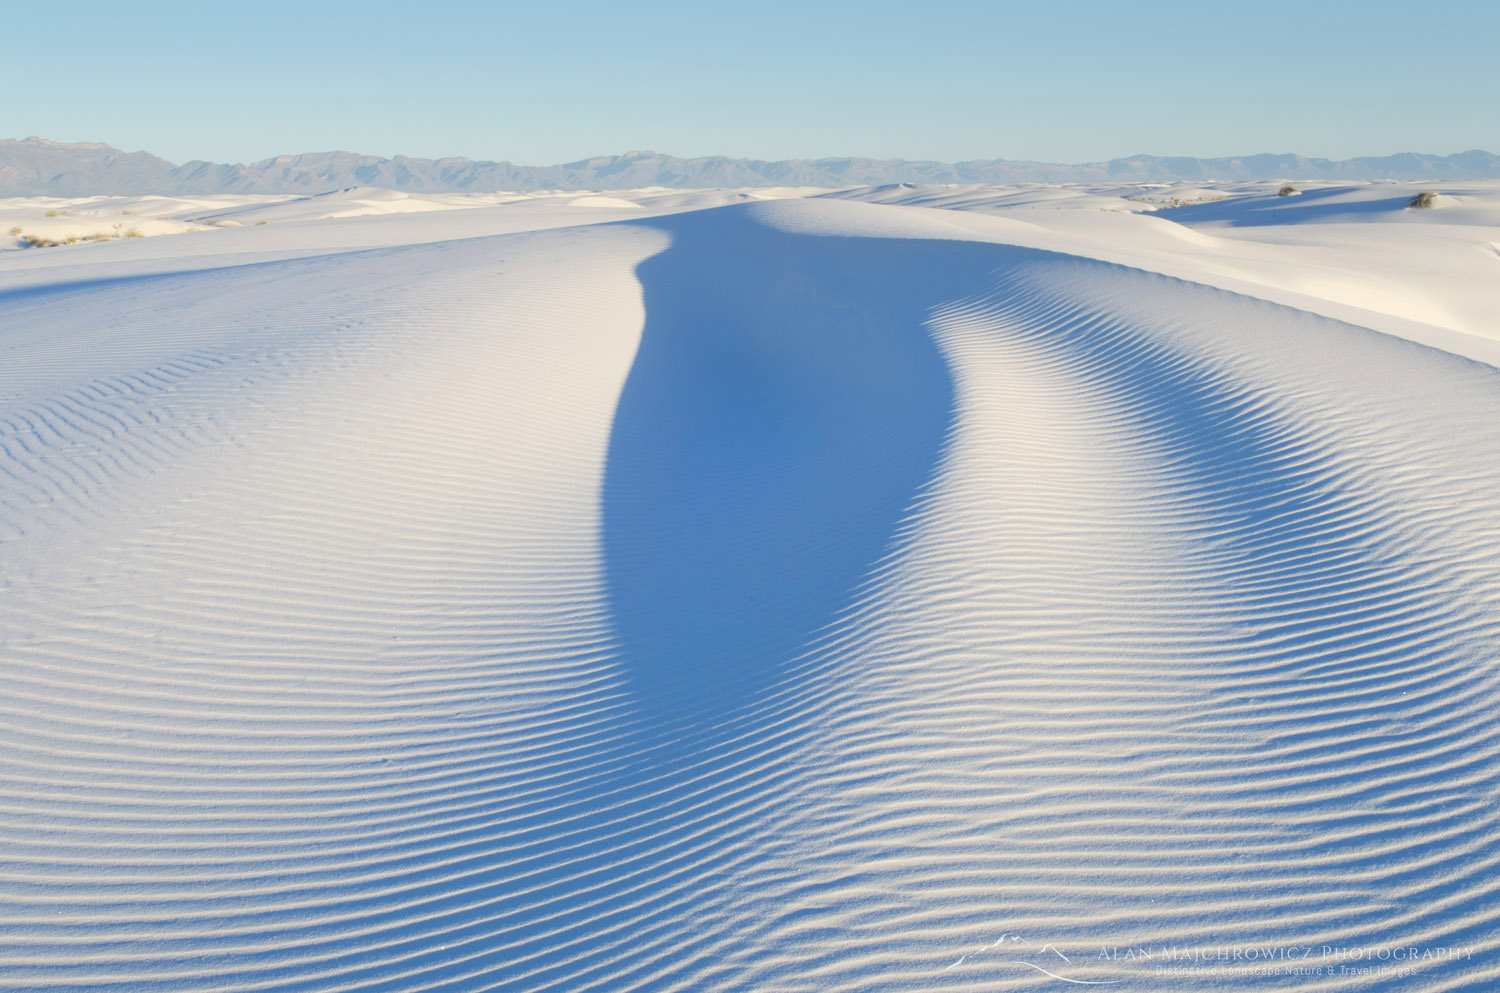 Ripple patterns in gypsum sand dunes, White Sands National Park New Mexico #57046